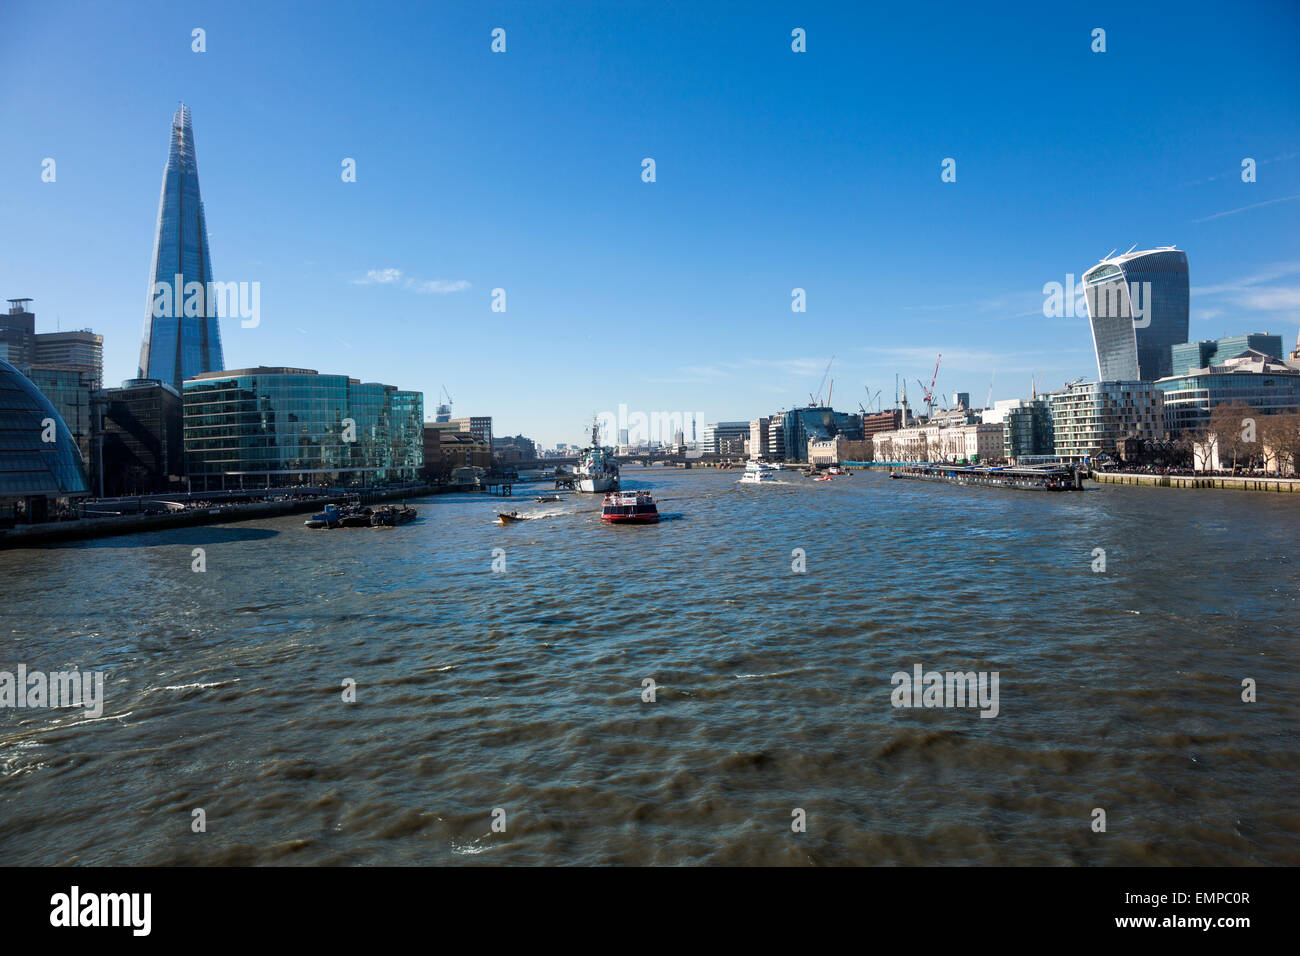 View of the River Thames with Southbank and Northbank visible Stock Photo